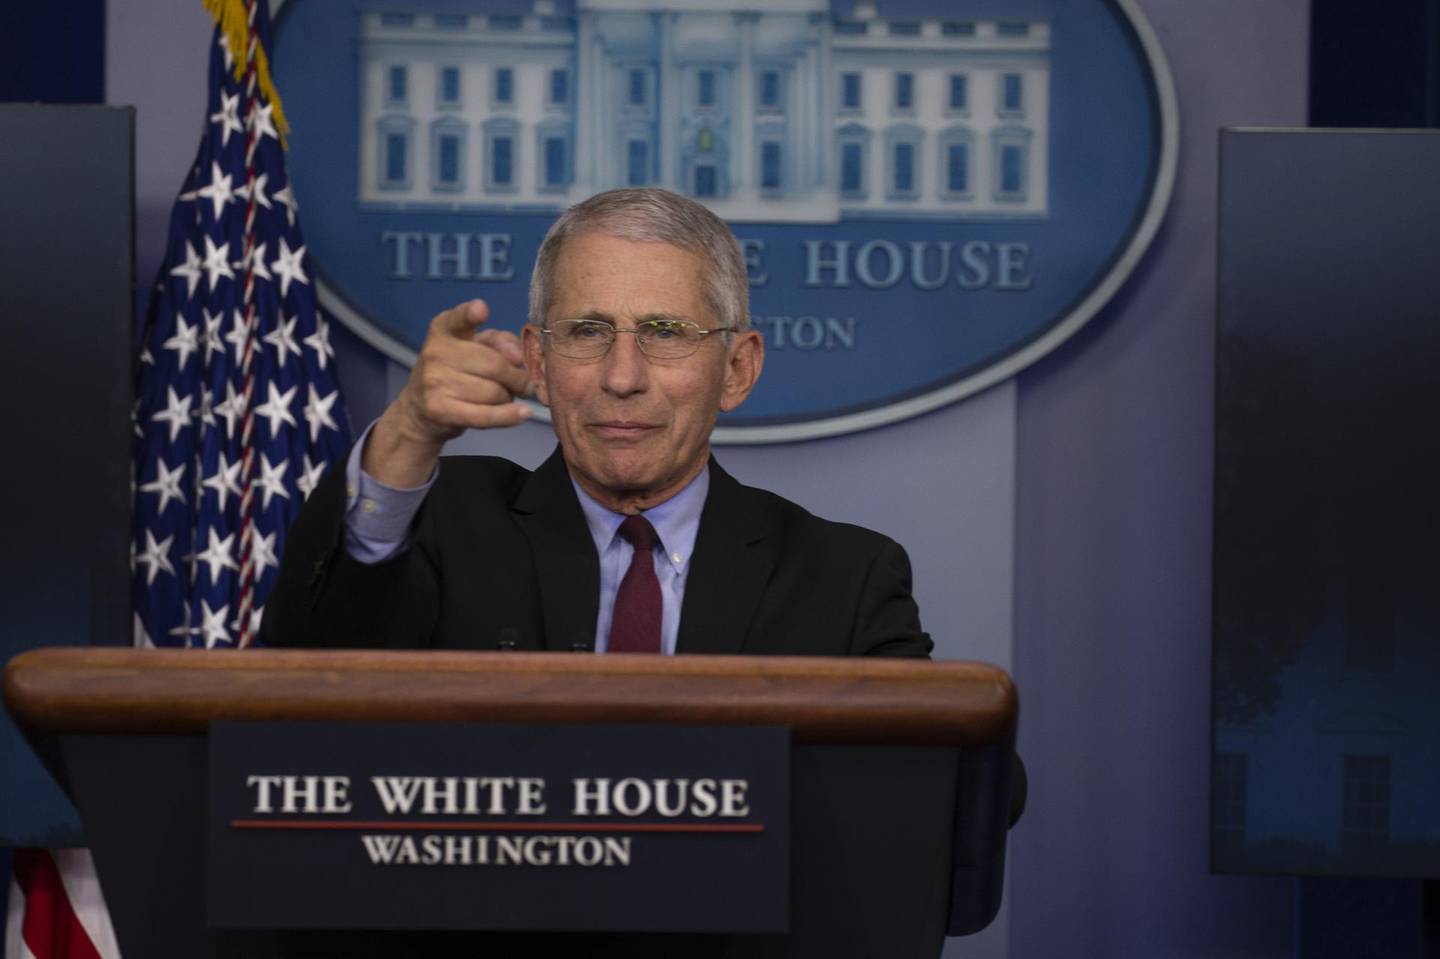 Anthony Fauci, director of the National Institute of Allergy and Infectious Diseases, speaks during a Coronavirus Task Force news conference at the White House in Washington, D.C., U.S., on Sunday, April 5, 2020. President Donald Trump and Vice President Mike Pence said they see signs the U.S. coronavirus outbreak is beginning to level off or stabilize, citing a day-to-day reduction in deaths in New York, the Covid-19 epicenter in the country. Photographer: Tasos Katopodis/Bloomberg